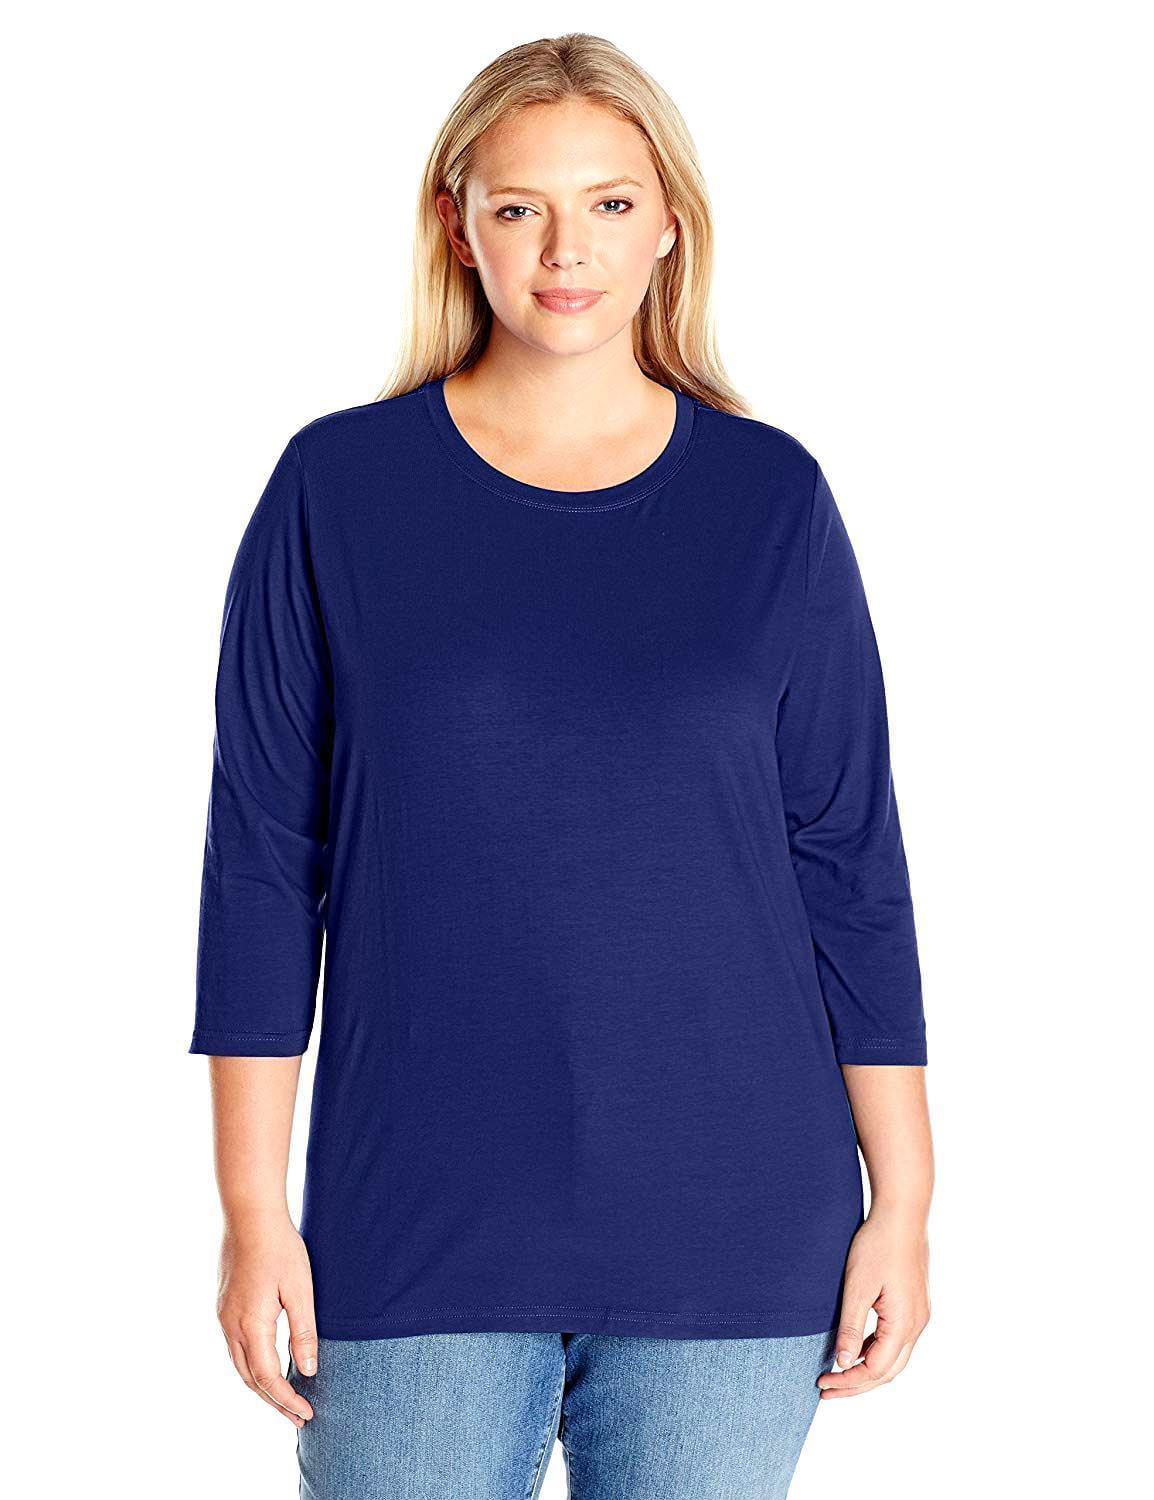 BODOAO Womens Plus Size Shirt Round Neck Print Top Blouse Double Layer T-Shirt